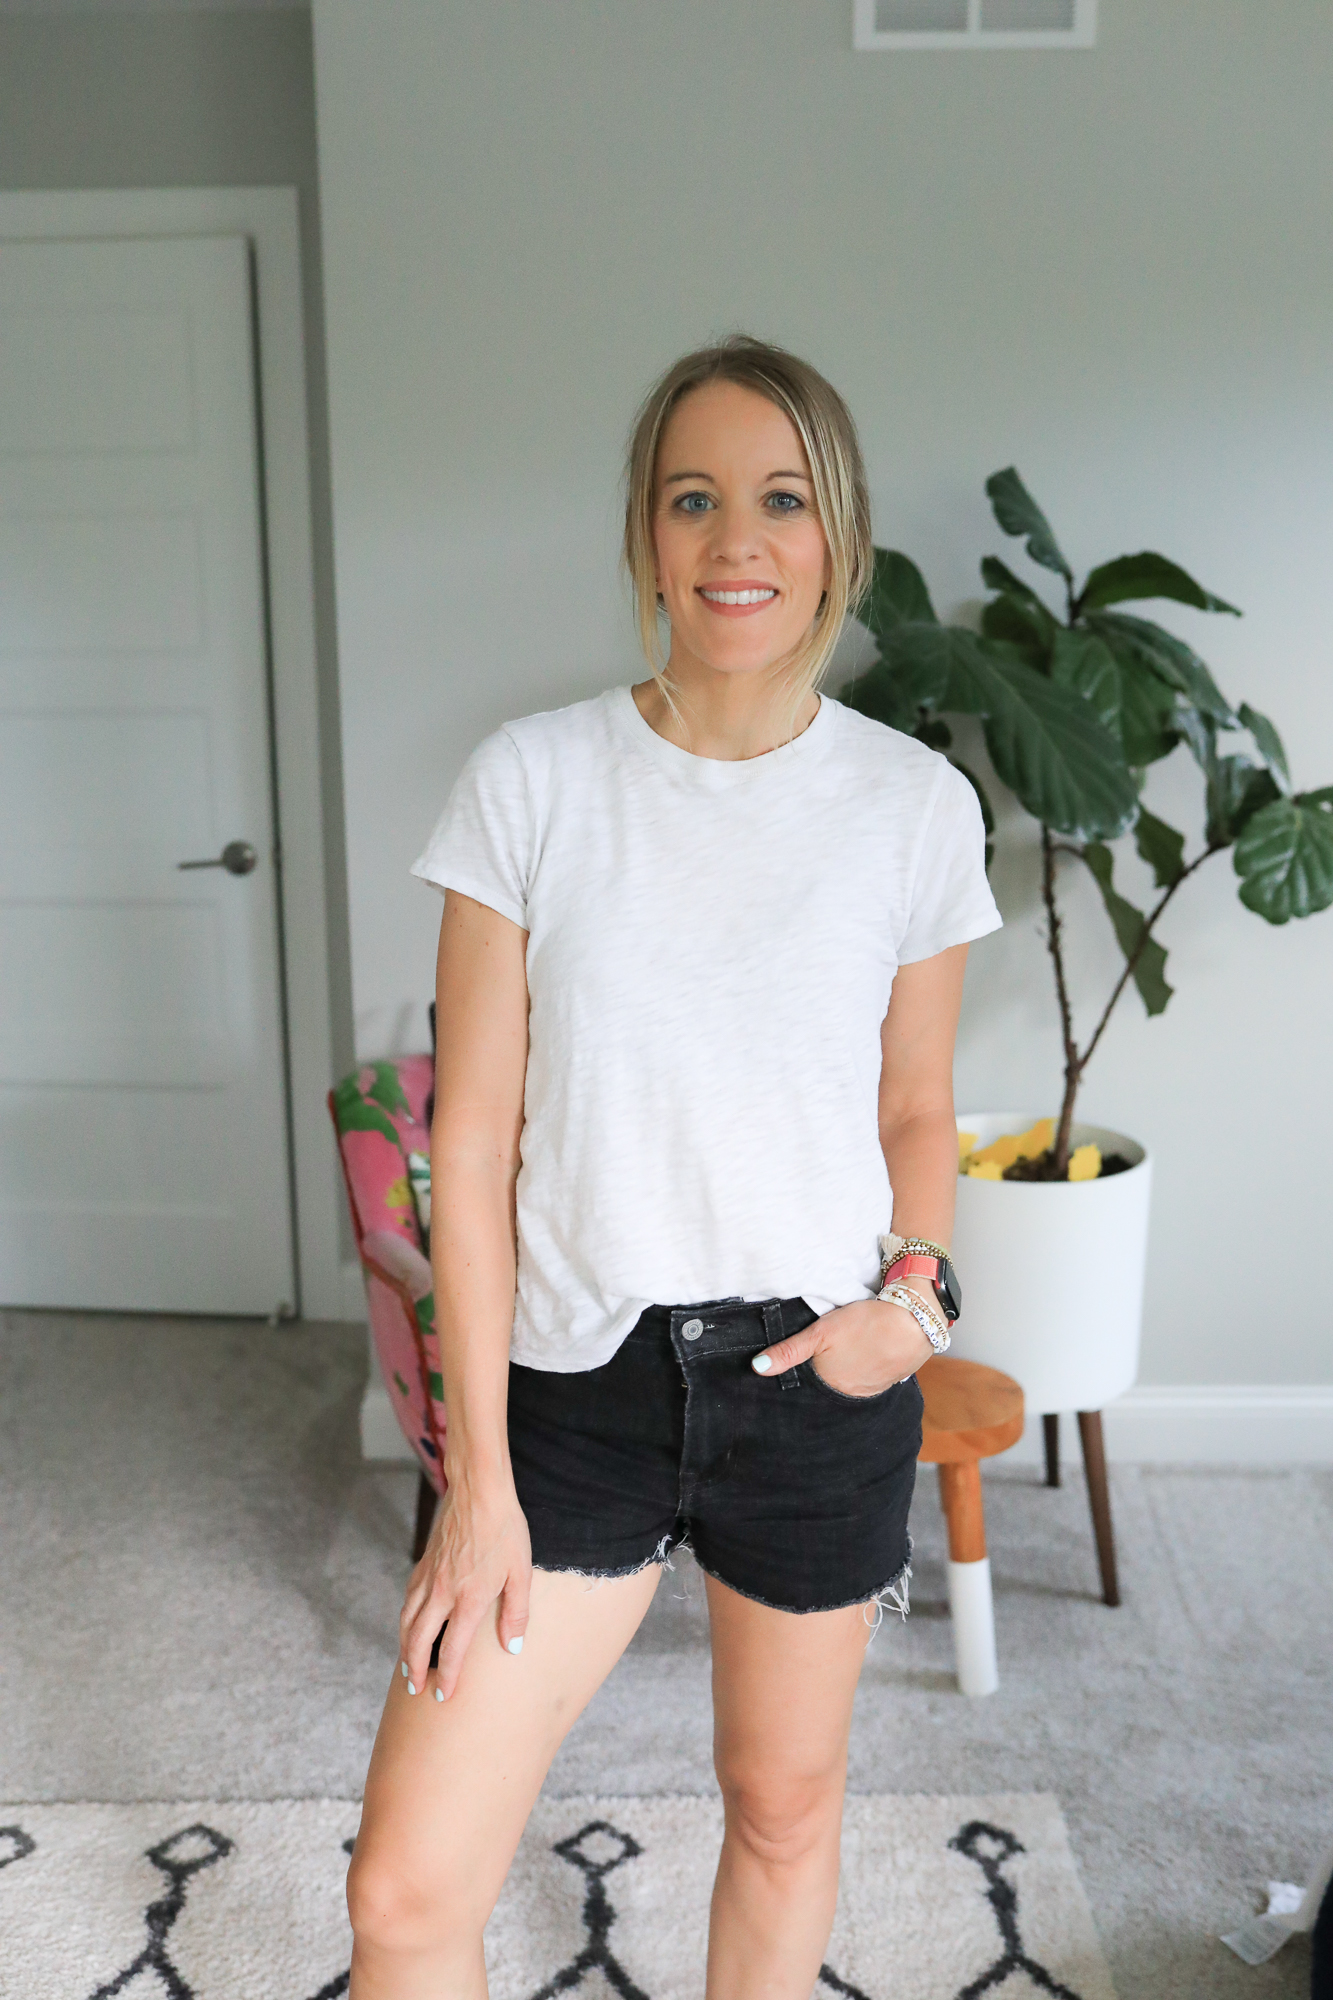 6 Perfect Jean Shorts for Women - Paisley & Sparrow